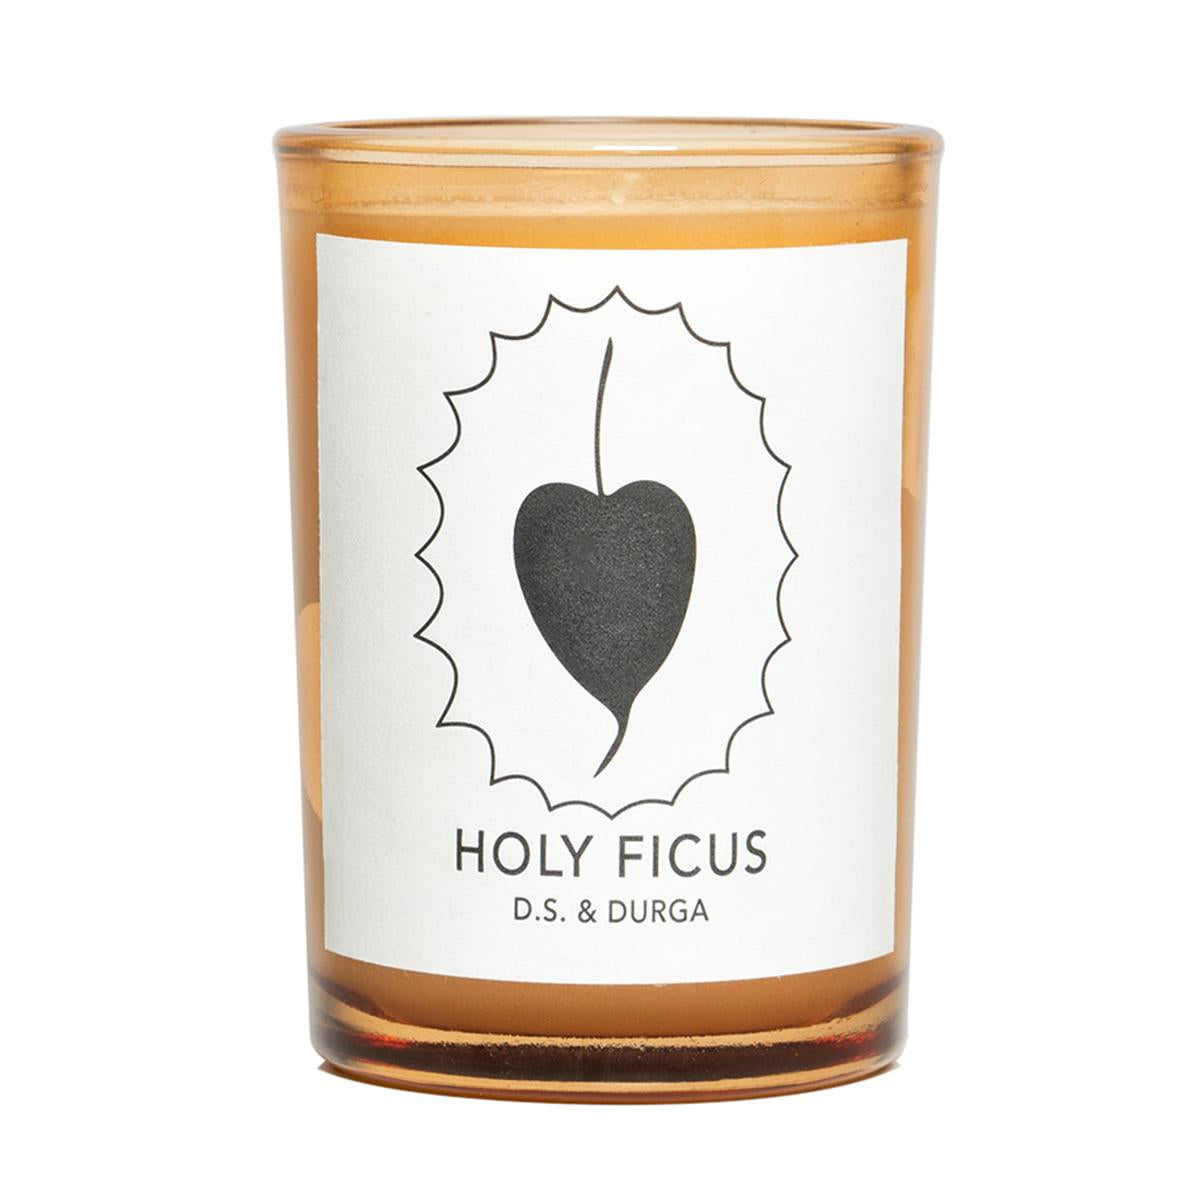 Primary image of Holy Ficus Candle